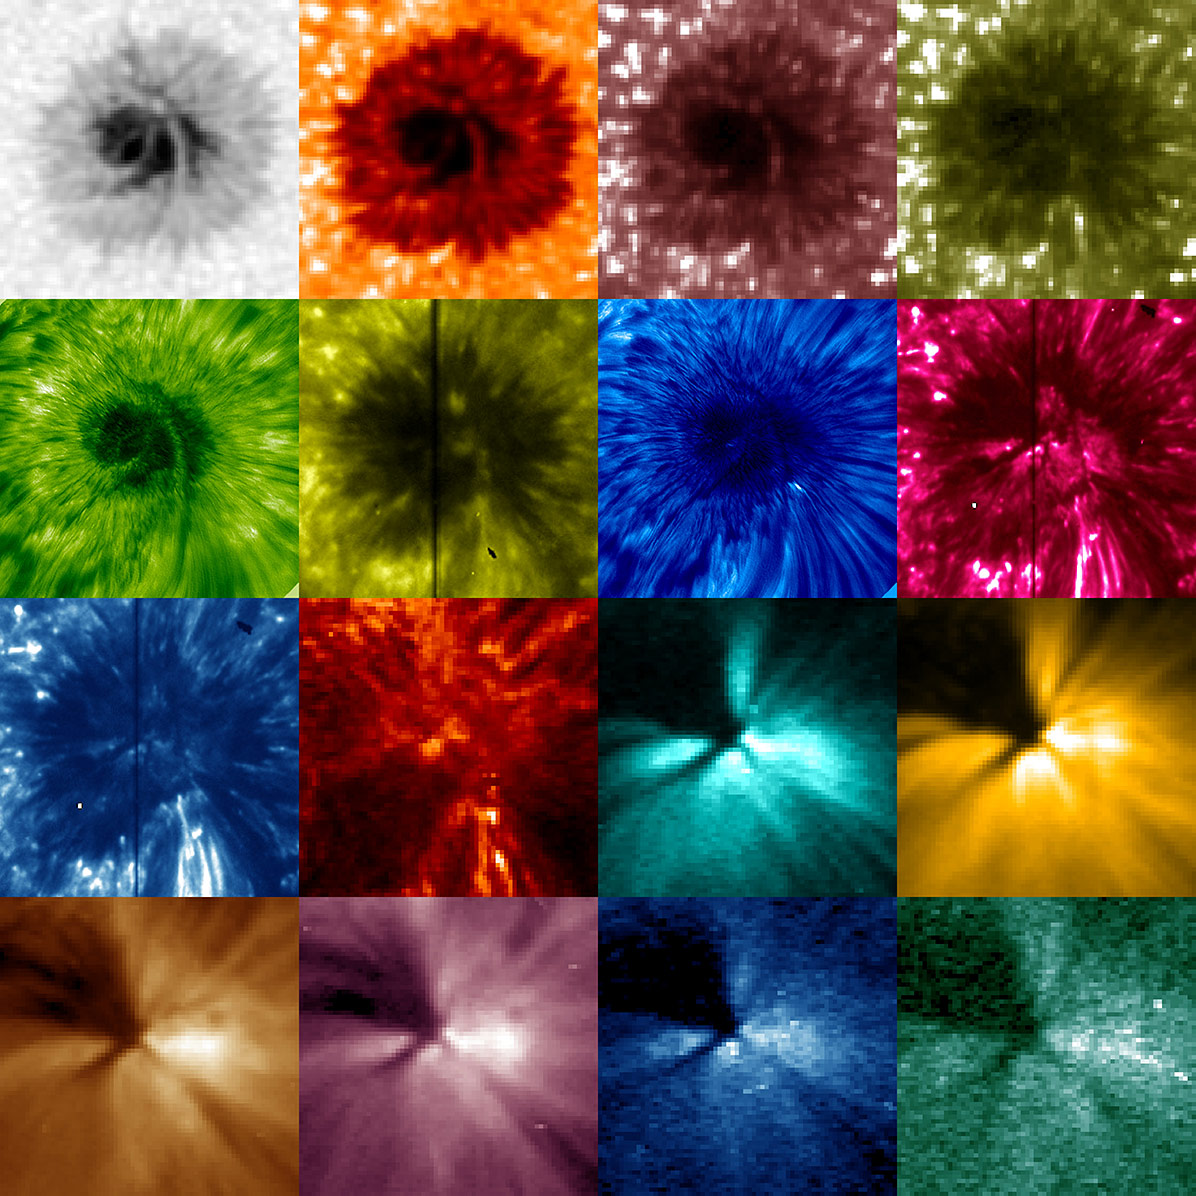 Scientists used data from NASA’s Solar Dynamics Observatory, NASA’s Interface Region Imaging Spectrograph, and the Big Bear Solar Observatory to track a solar wave as it channeled upwards from the sun’s surface into the atmosphere. Credits: Zhao et al/NASA/SDO/IRIS/BBSO